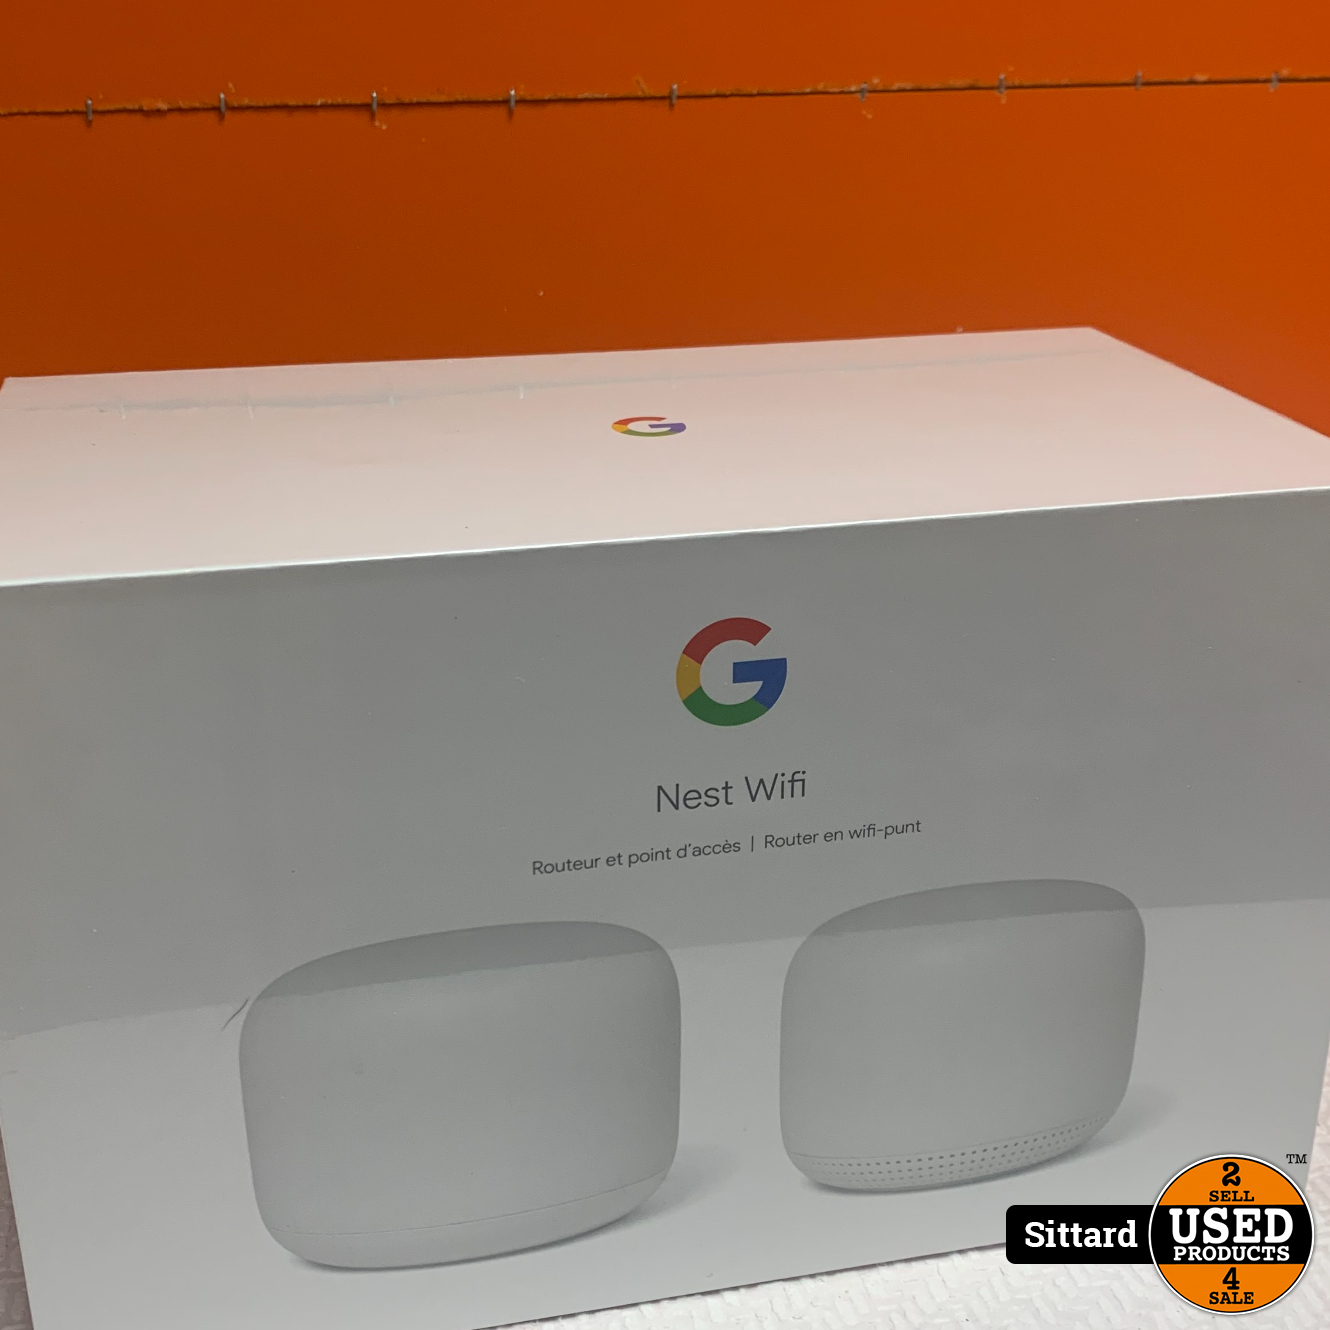 Google Nest Wifi router en wifipunt nwpr, 219 - Used Products Sittard